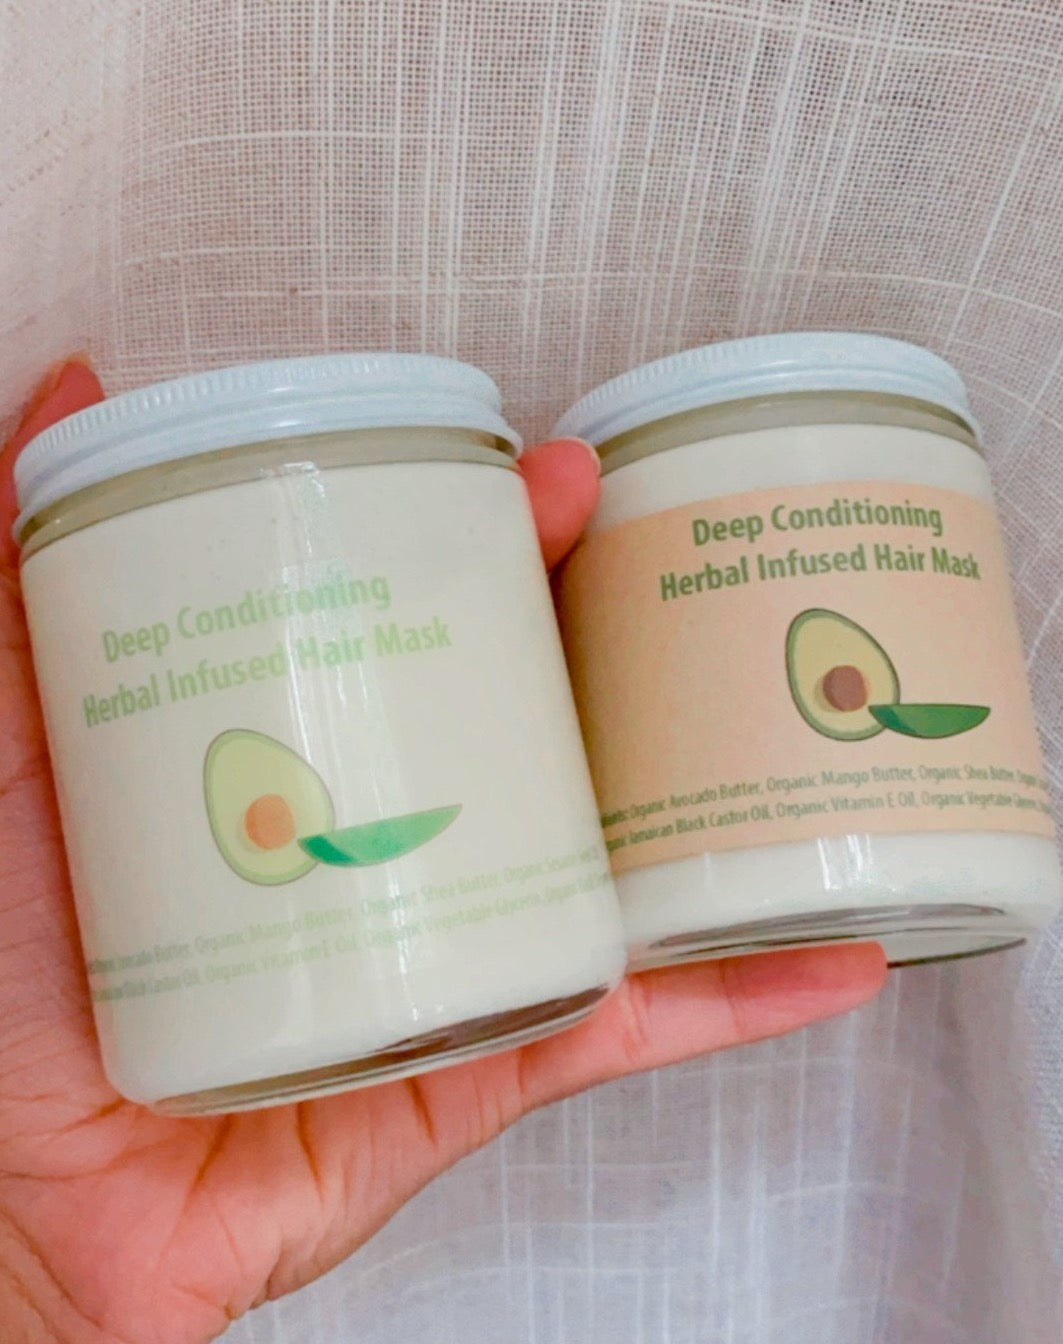 Deep Conditioning Herbal Infused Hair Mask